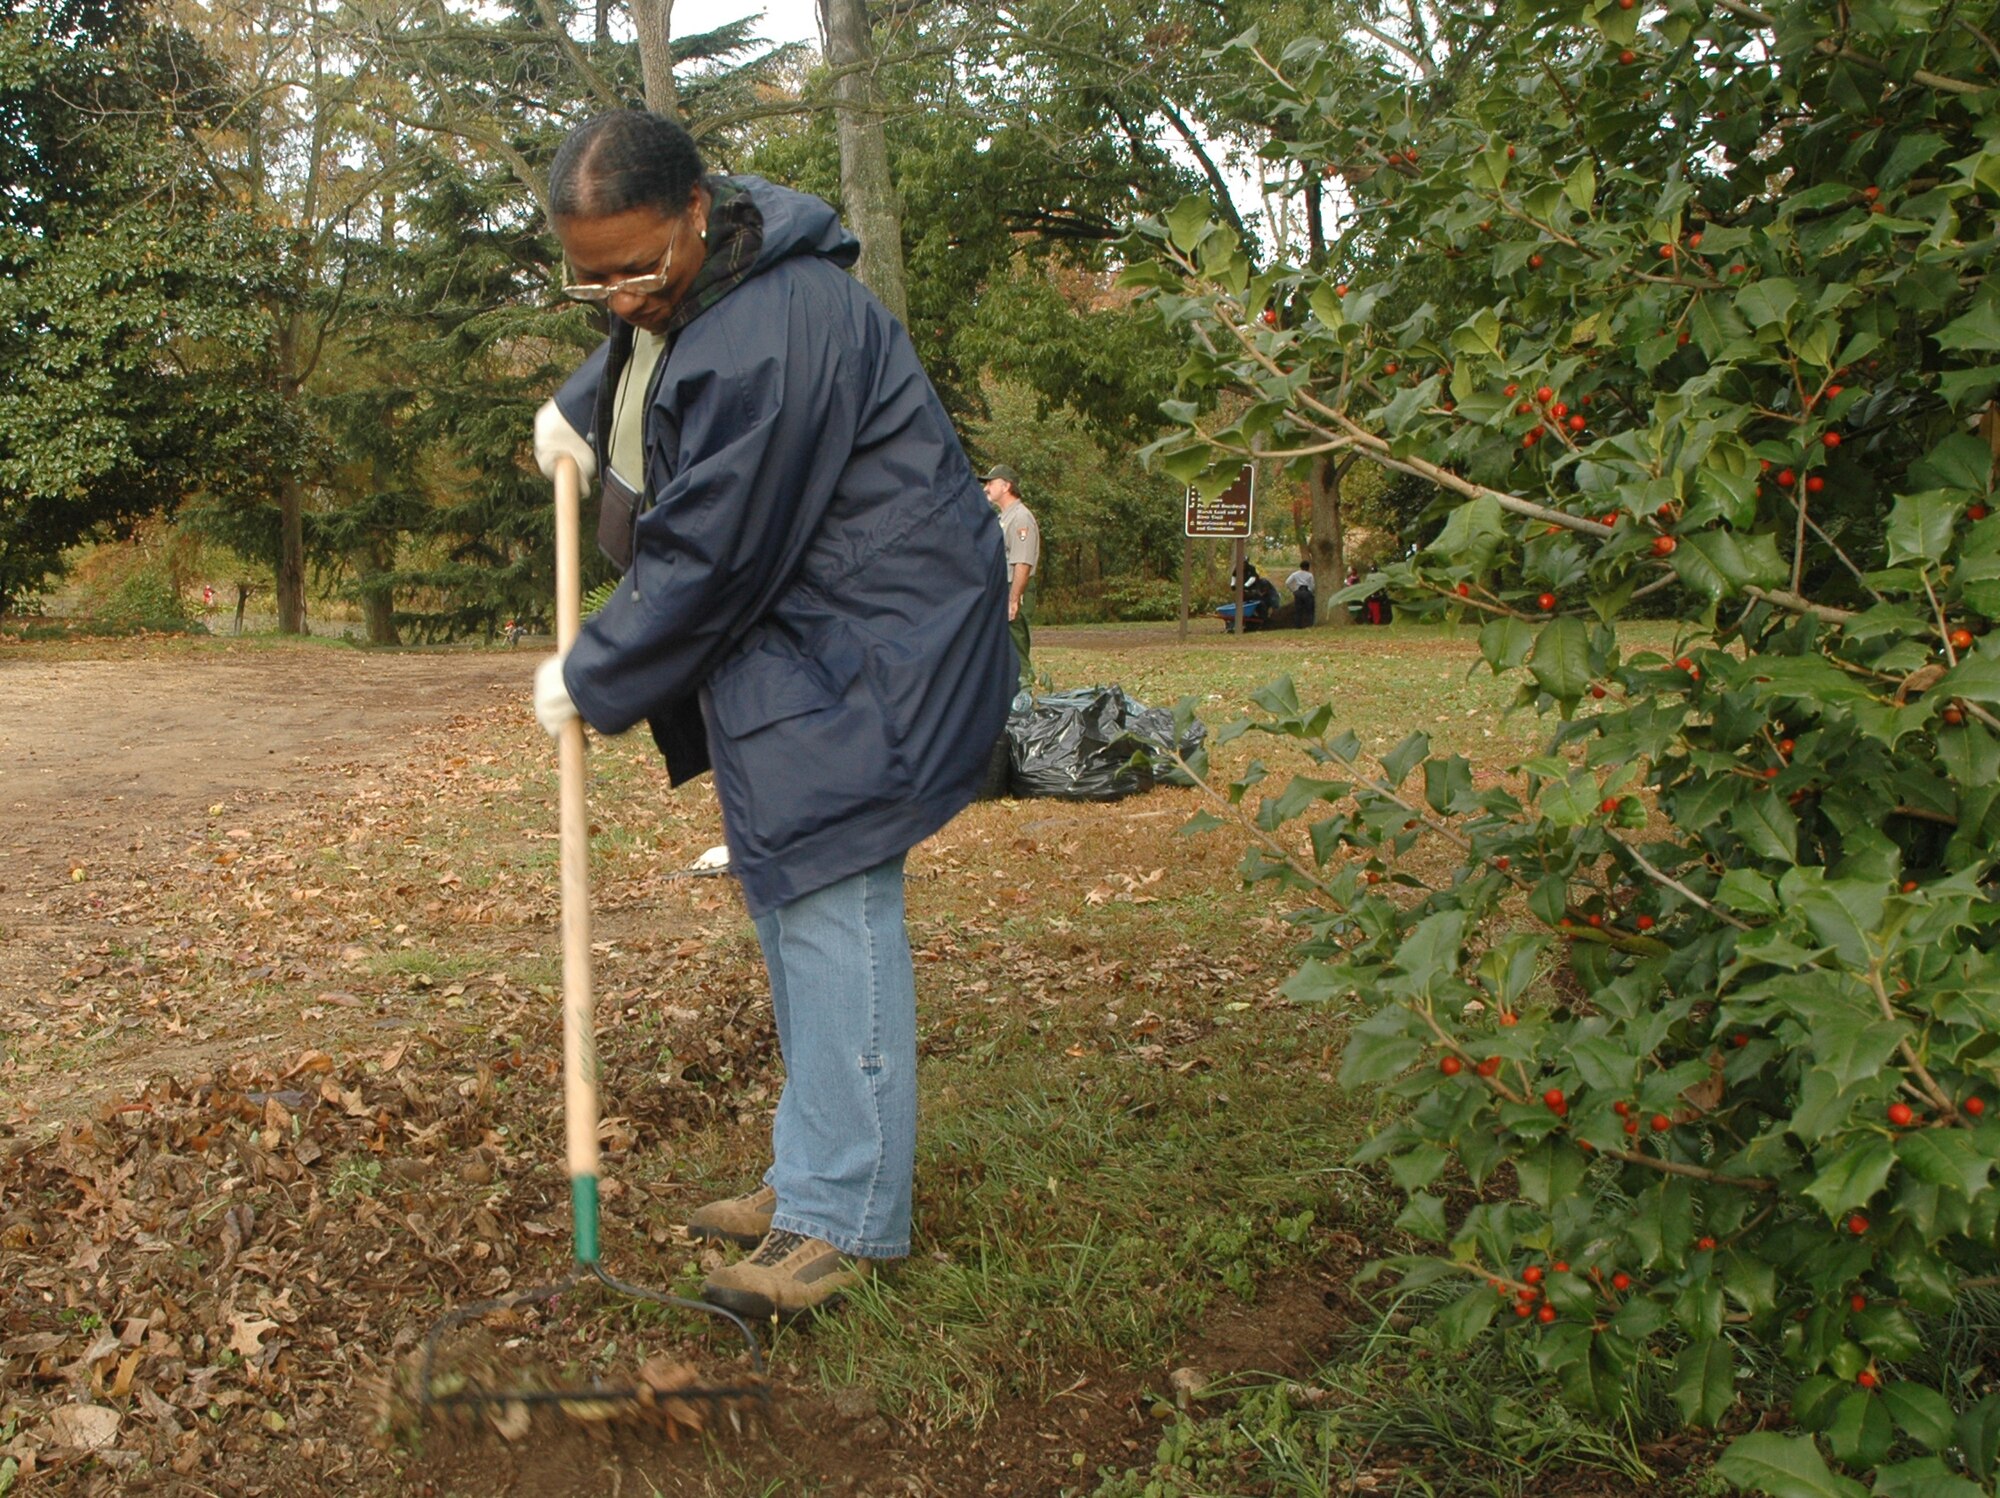 Mary S. Lee rakes leaves Oct. 25 at Kenilworth Aquatic Garden in Washington. Ms. Lee and her husband, Michael V. Lee, Air Force District of Washington, volunteered at KAQ with Airmen, Sailors and Soldiers from the National Capital Region as part of a joint service project for national “Make a Difference Day.”